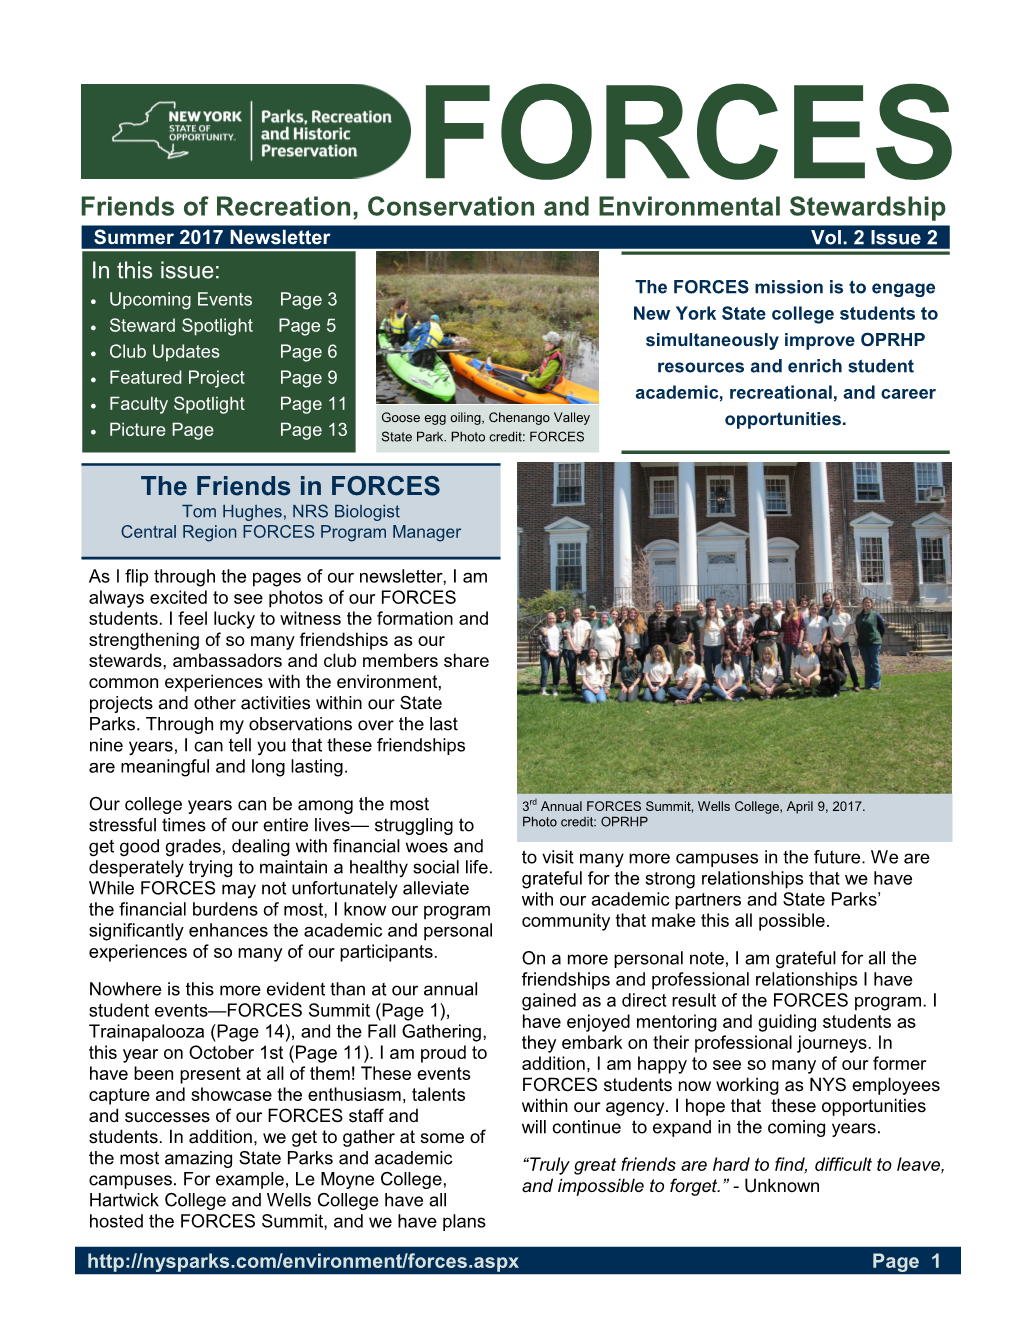 FORCES Friends of Recreation, Conservation and Environmental Stewardship